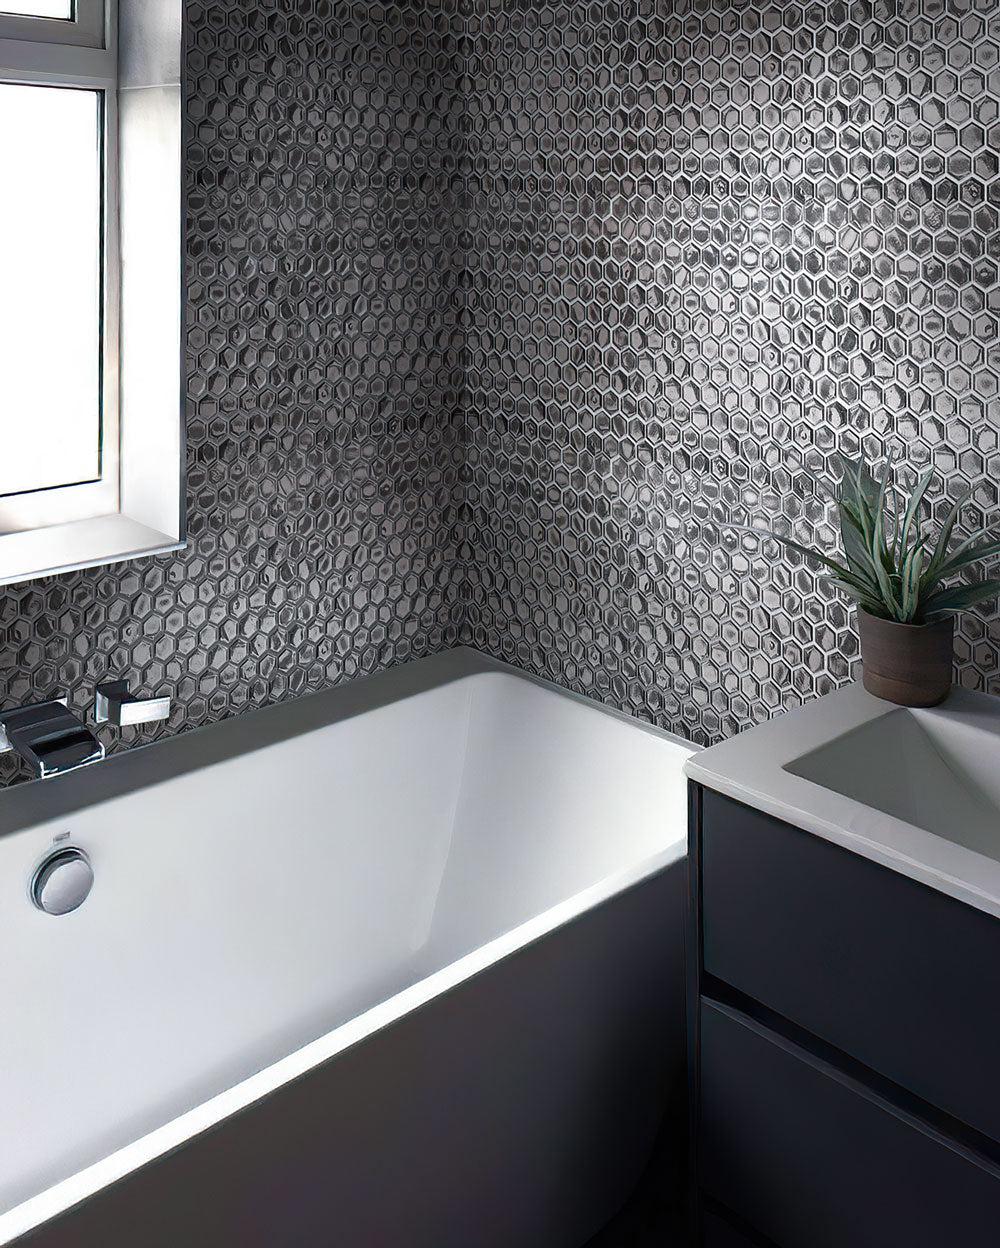 Graphite and white bathroom with Glossy Silver Hexagon Glass Mosaic Tile backsplash